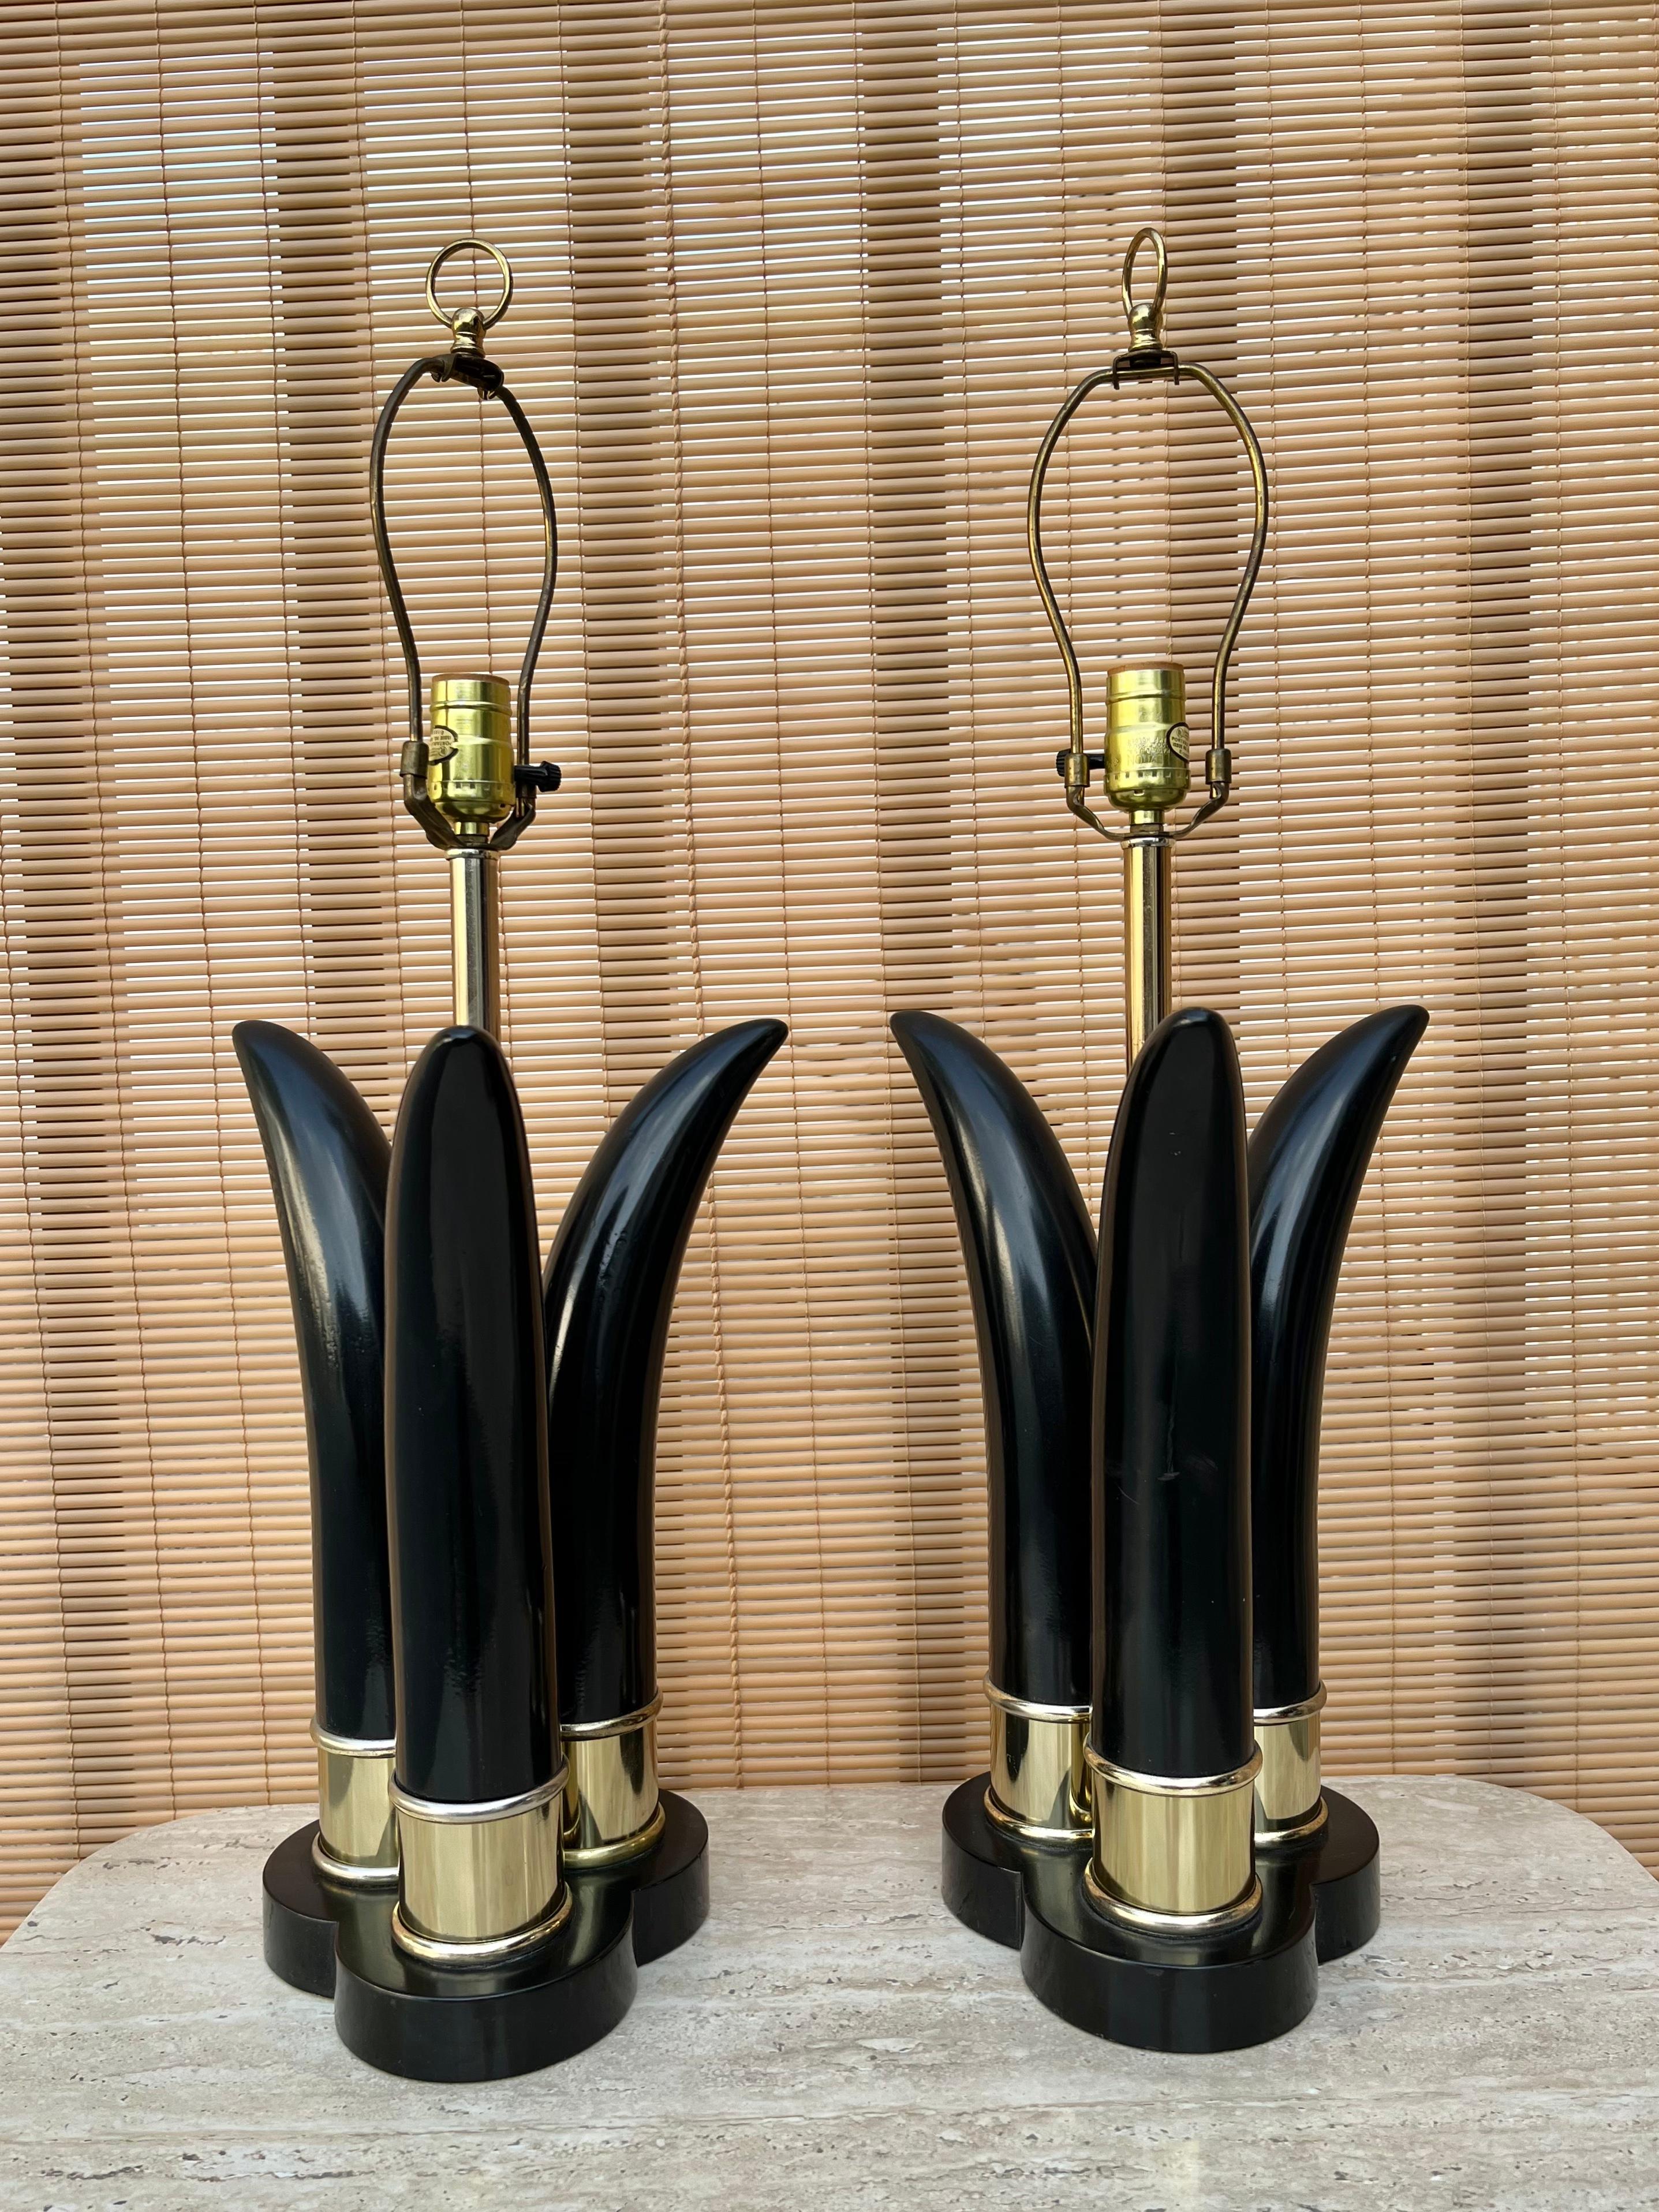 A pair of Vintage Mid-Century Modern sculptural black and brass table lamps. Circa early 1970s. 
Feature three black lacquered horn shaped sculptural elements with brass pleated rings at the base, a brass stand to hold the lightbulb and brass ring